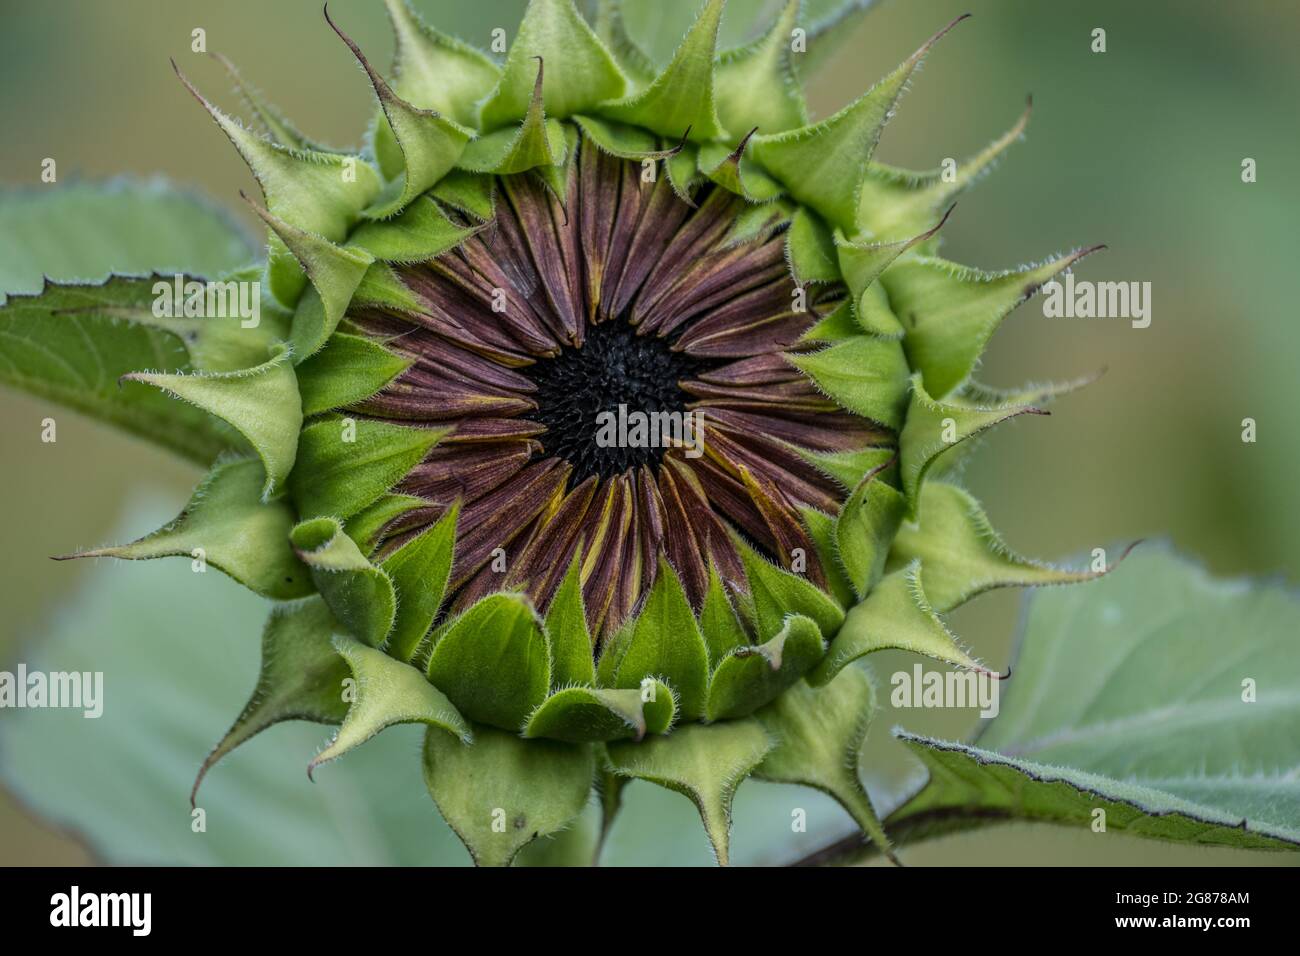 Flower Bud Opening Stock Photos - 74,265 Images